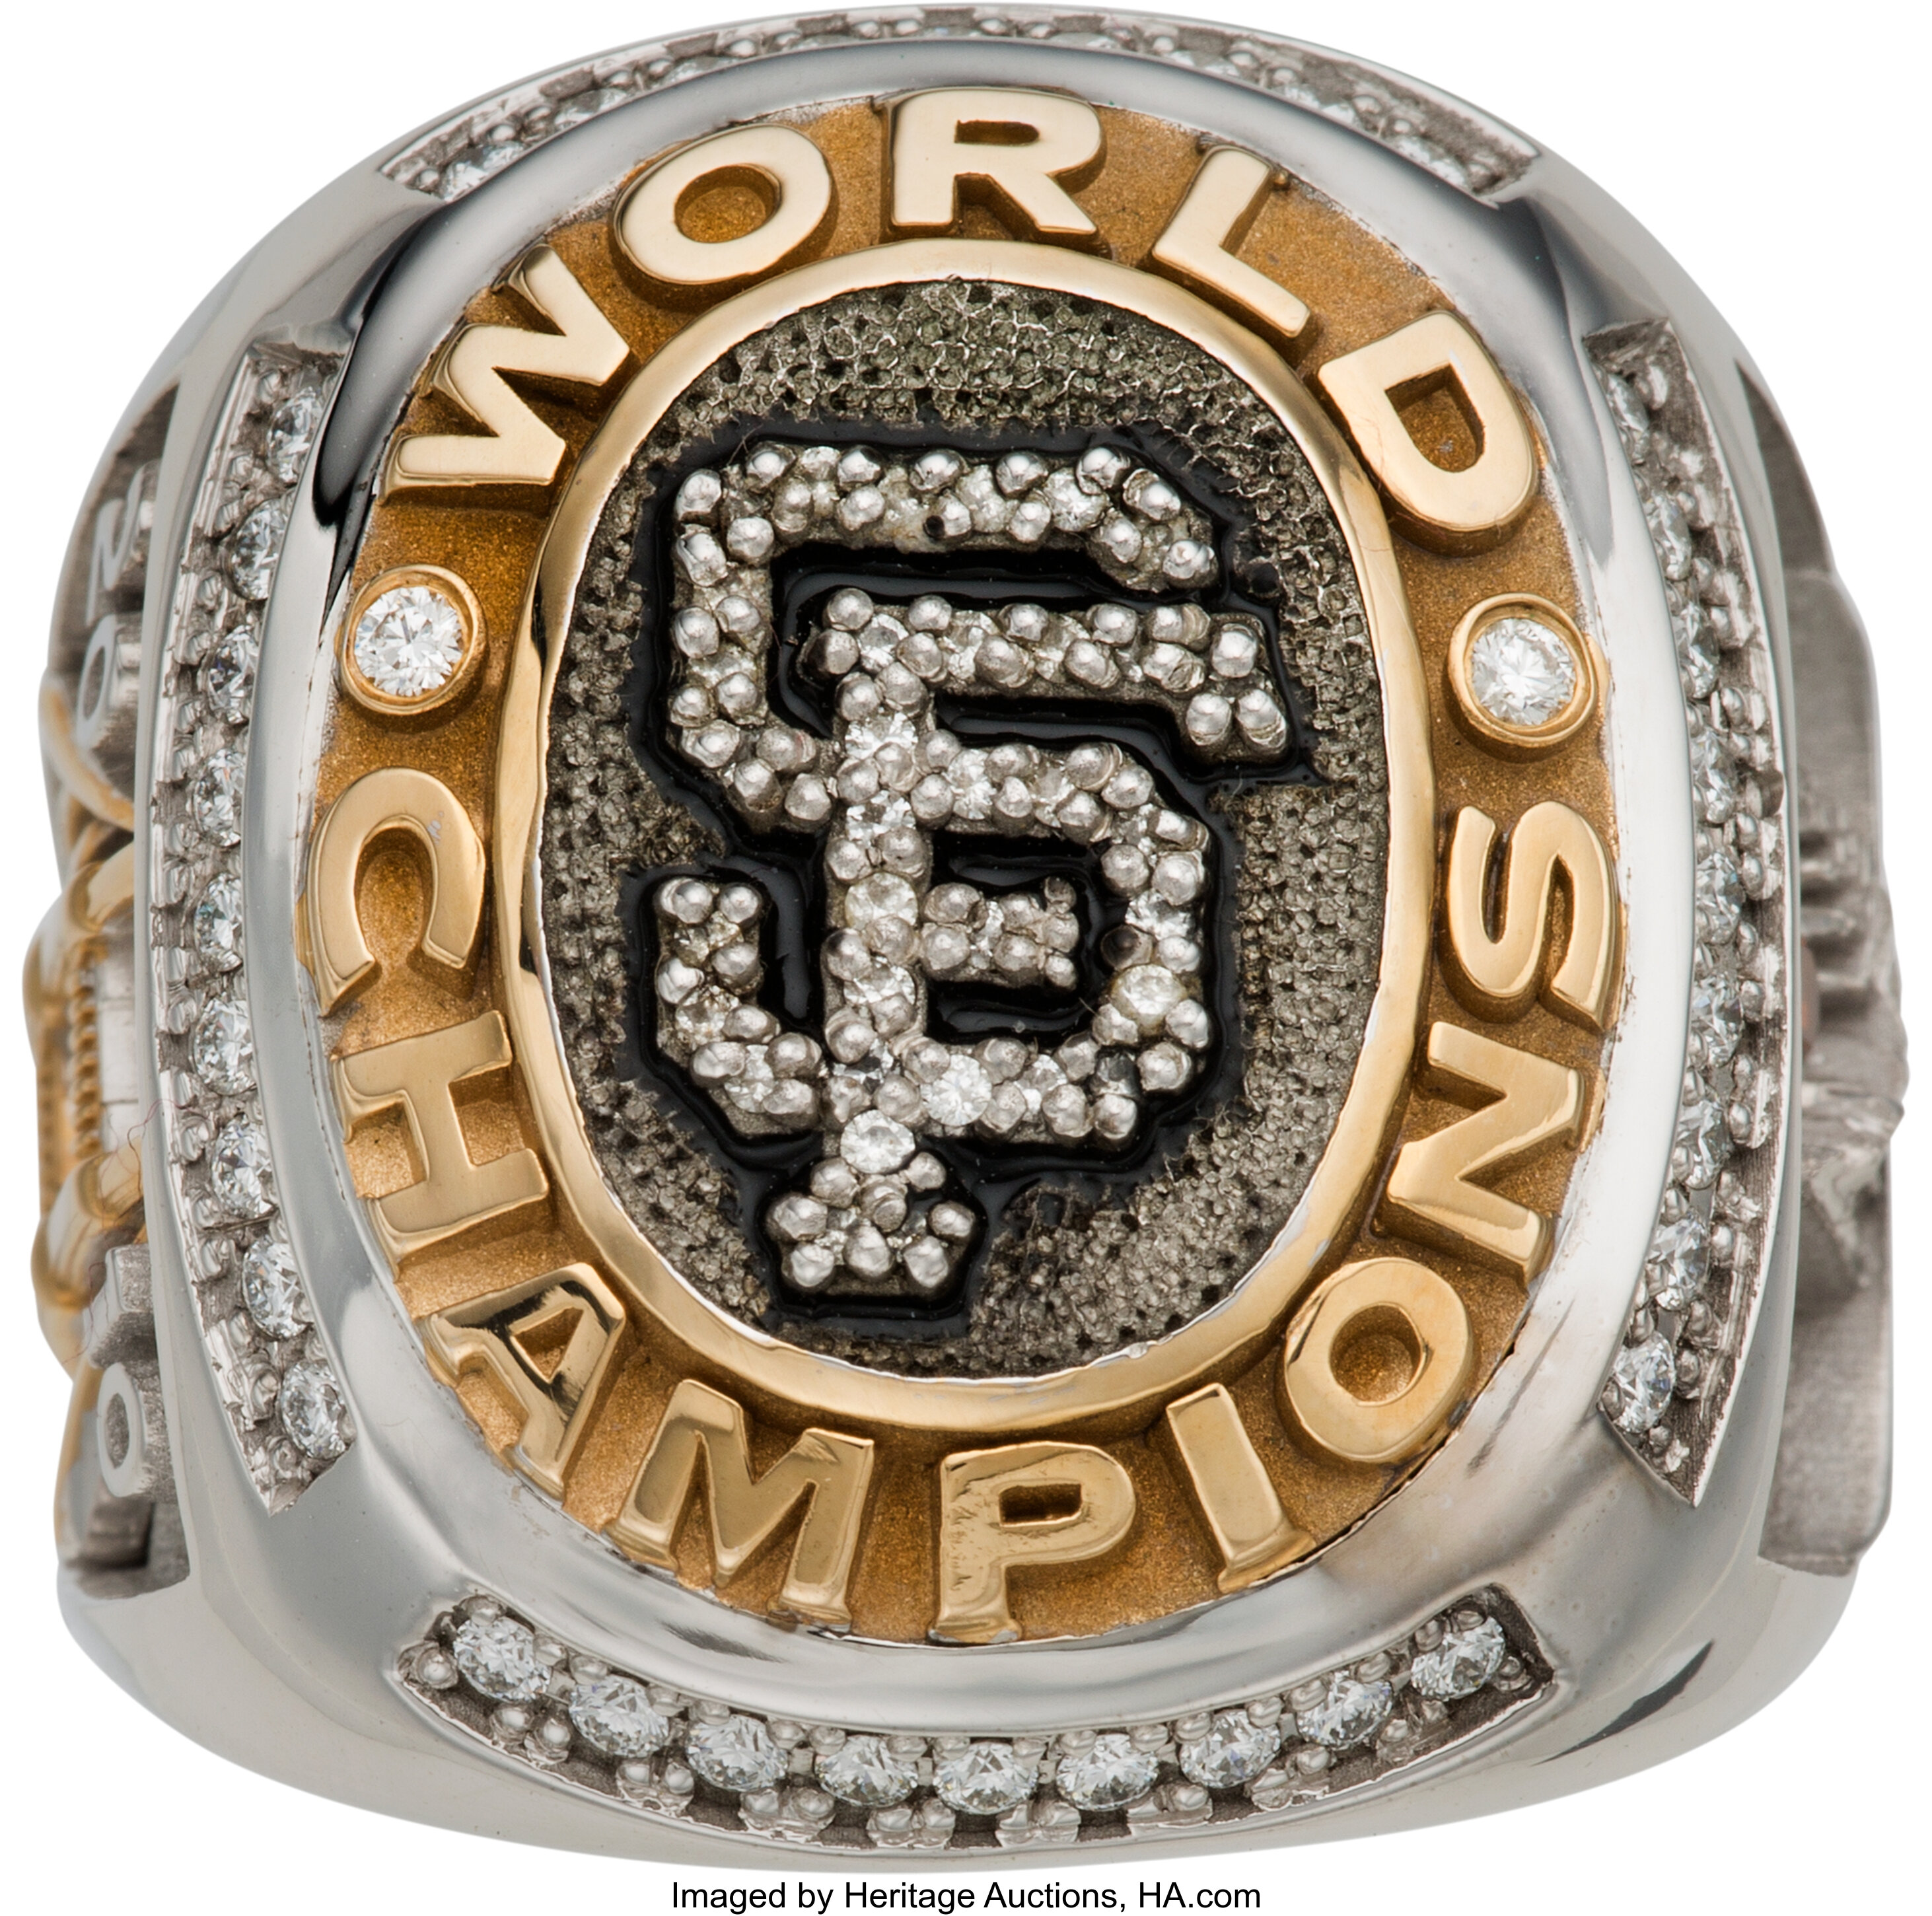 Remembering Giants 2010 World Series title